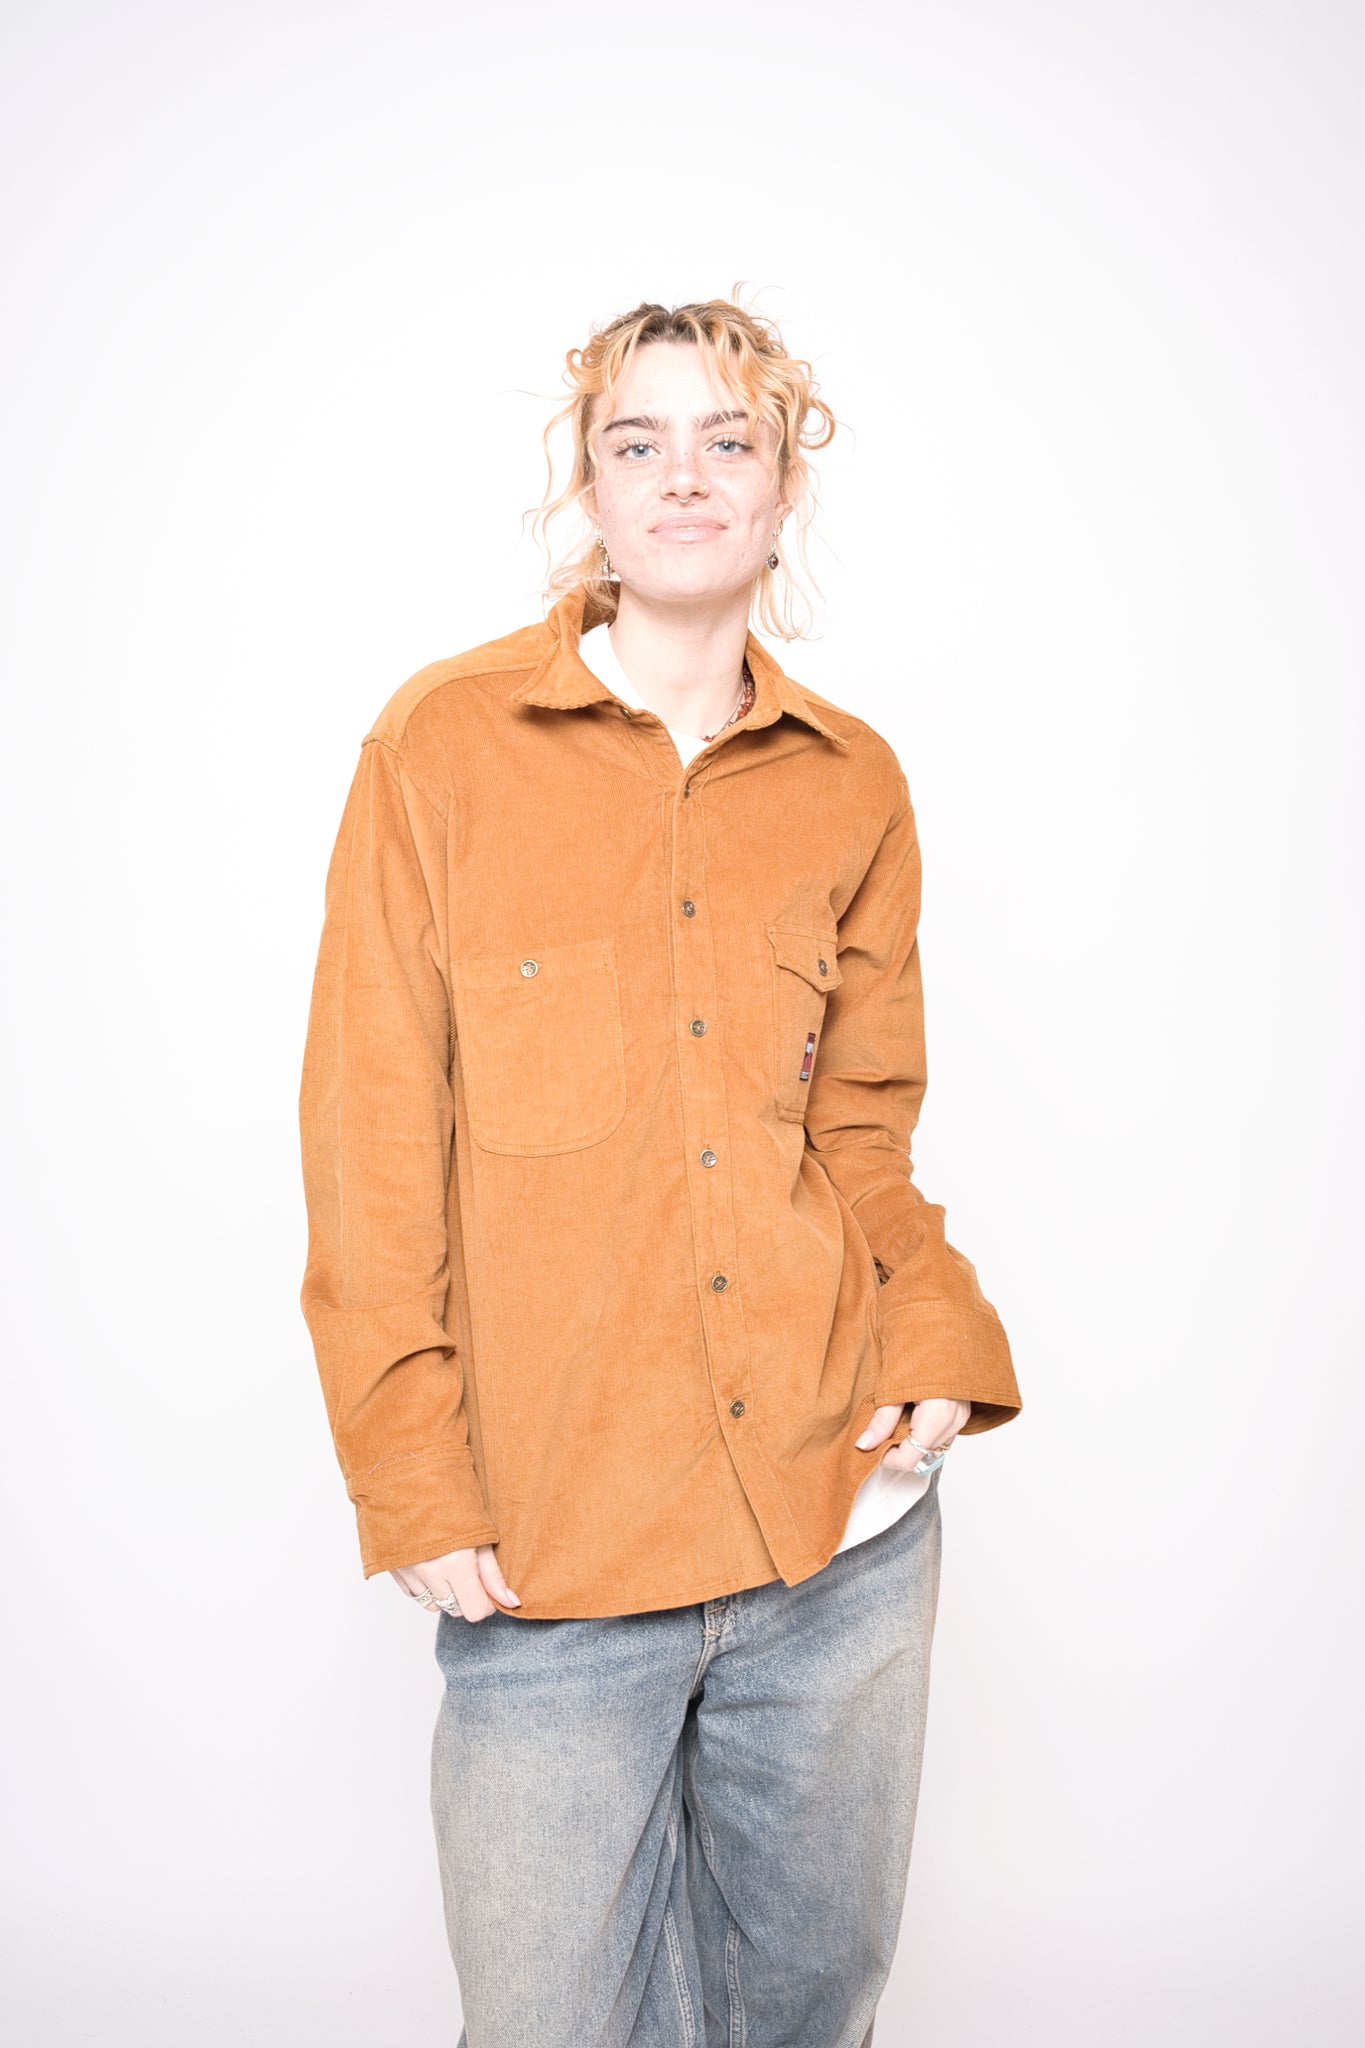 down to earth - brown - unisex